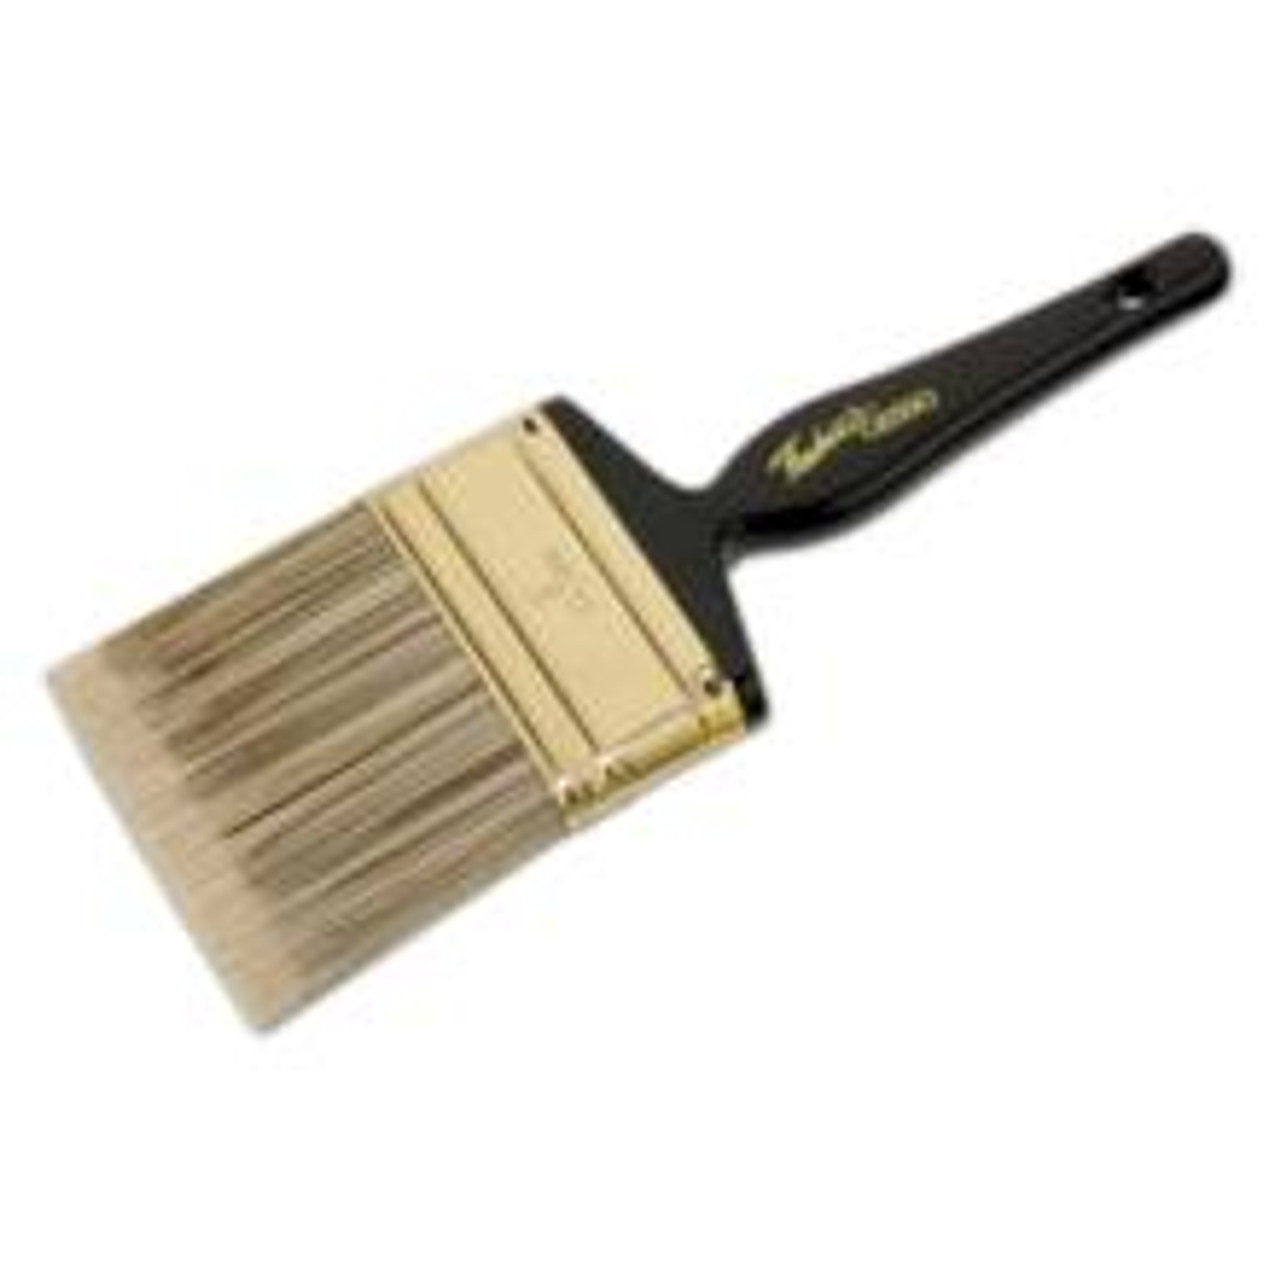 Natural Chungking Bristle Varnishing and Gesso Brushes